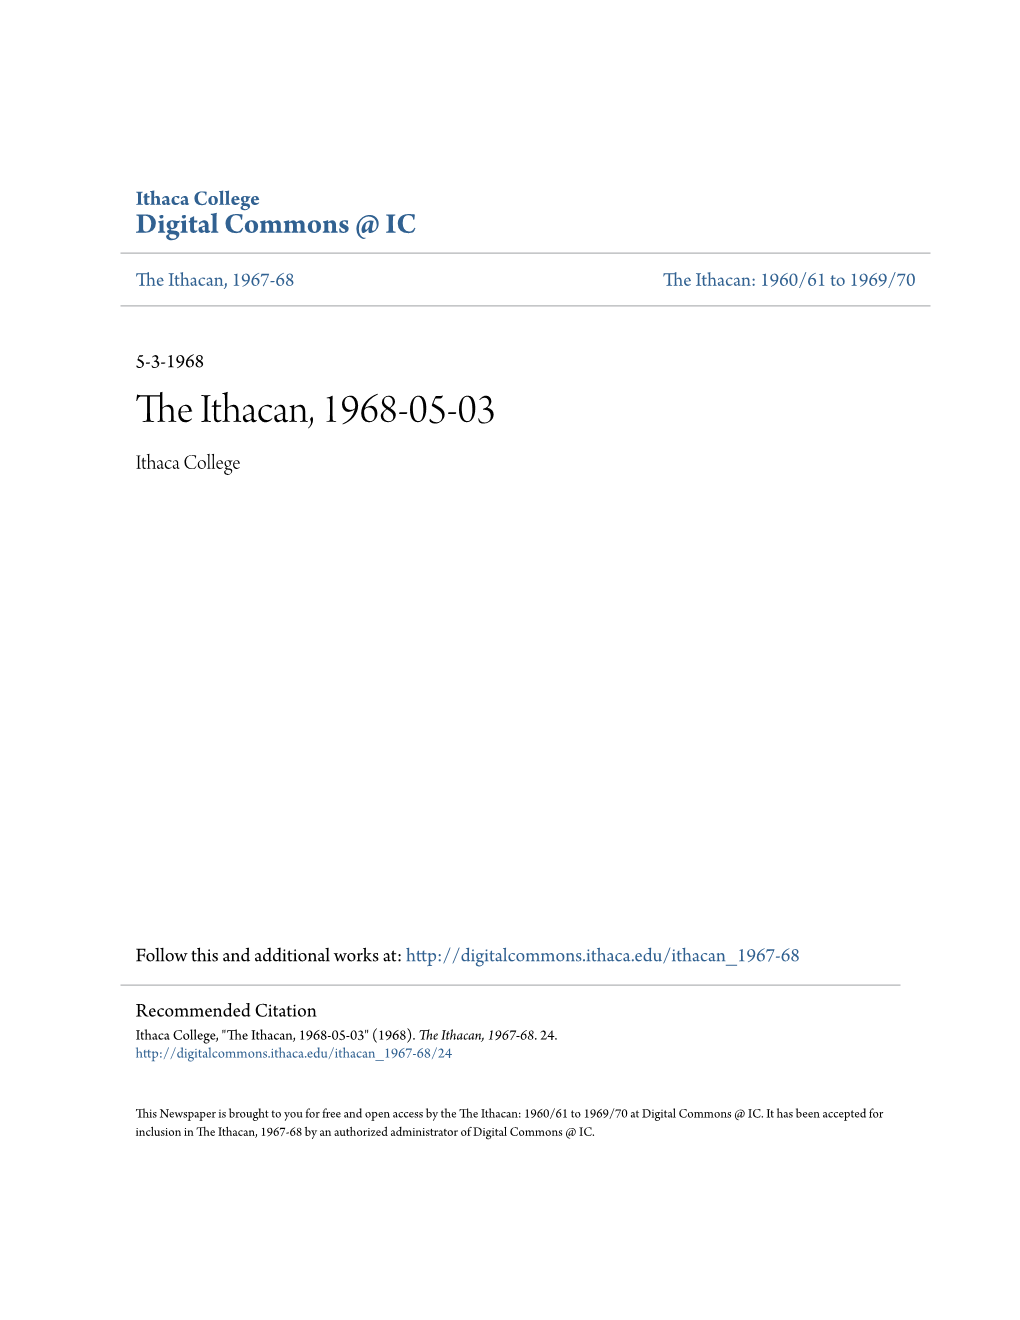 The Ithacan, 1968-05-03